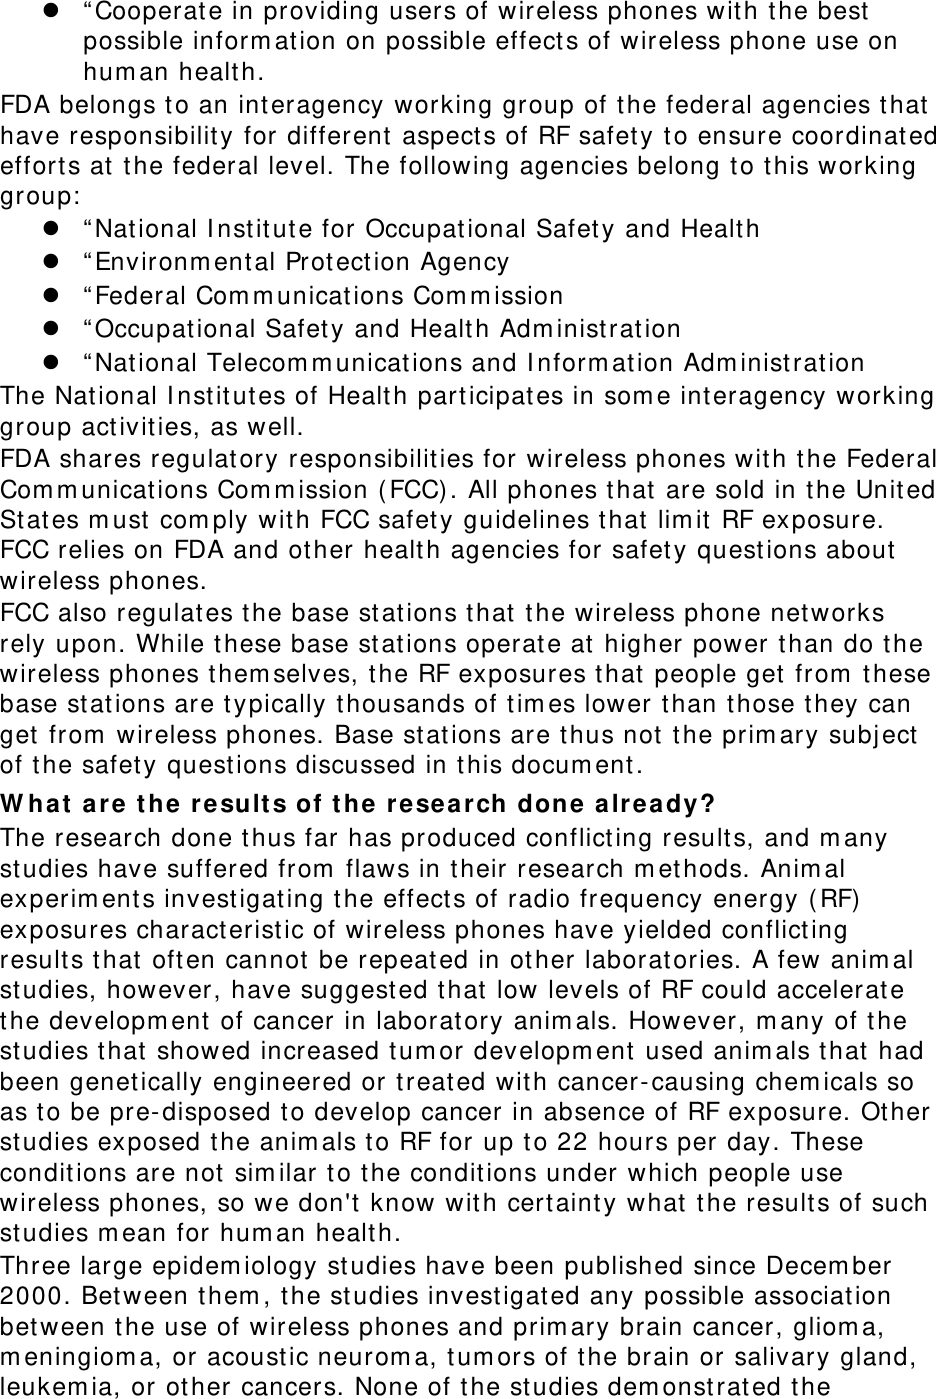 z “ Cooperate in providing users of wireless phones wit h the best  possible inform ation on possible effect s of wireless phone use on hum an health. FDA belongs t o an interagency working group of t he federal agencies that have responsibility for different  aspect s of RF safet y to ensure coordinated effort s at t he federal level. The following agencies belong to t his working group:  z “ Nat ional I nst it ut e for Occupational Safet y and Healt h z “ Environm ent al Protect ion Agency z “ Federal Com m unications Com m ission z “ Occupational Safety and Healt h Adm inist ration z “ Nat ional Telecom m unications and I nform ation Adm inist ration The National I nst itut es of Health part icipates in som e int eragency working group act ivities, as well. FDA shares regulatory responsibilit ies for wireless phones with t he Federal Com m unications Com m ission ( FCC). All phones t hat are sold in t he Unit ed St at es m ust  com ply wit h FCC safety guidelines t hat lim it RF exposure. FCC relies on FDA and other healt h agencies for safety quest ions about  wireless phones. FCC also regulates t he base st ations t hat the wireless phone networks rely upon. While t hese base st at ions operat e at higher power t han do t he wireless phones t hem selves, t he RF exposures t hat people get from  these base st ations are t ypically t housands of t im es lower t han t hose t hey can get from  wireless phones. Base stations are t hus not  t he prim ary subj ect  of t he safety quest ions discussed in t his docum ent . W ha t a r e  the result s of t h e  r e search done a lr e a dy? The research done t hus far has produced conflict ing results, and m any studies have suffered from  flaws in t heir research m ethods. Anim al experim ent s invest igat ing t he effect s of radio frequency energy ( RF)  exposures charact erist ic of wireless phones have yielded conflict ing results that oft en cannot be repeat ed in ot her laboratories. A few anim al studies, however, have suggest ed t hat low levels of RF could accelerate the developm ent of cancer in laboratory anim als. However, m any of the studies t hat showed increased t um or developm ent  used anim als that had been genetically engineered or t reat ed wit h cancer- causing chem icals so as t o be pre- disposed t o develop cancer in absence of RF exposure. Ot her studies exposed t he anim als t o RF for up t o 22 hours per day. These condit ions are not sim ilar to t he condit ions under which people use wireless phones, so we don&apos;t know wit h cert aint y what t he results of such studies m ean for hum an healt h. Three large epidem iology st udies have been published since Decem ber 2000. Between them , t he st udies invest igated any possible associat ion between t he use of wireless phones and prim ary brain cancer, gliom a, m eningiom a, or acoust ic neurom a, t um ors of the brain or salivary gland, leukem ia, or other cancers. None of t he st udies dem onstrat ed t he 